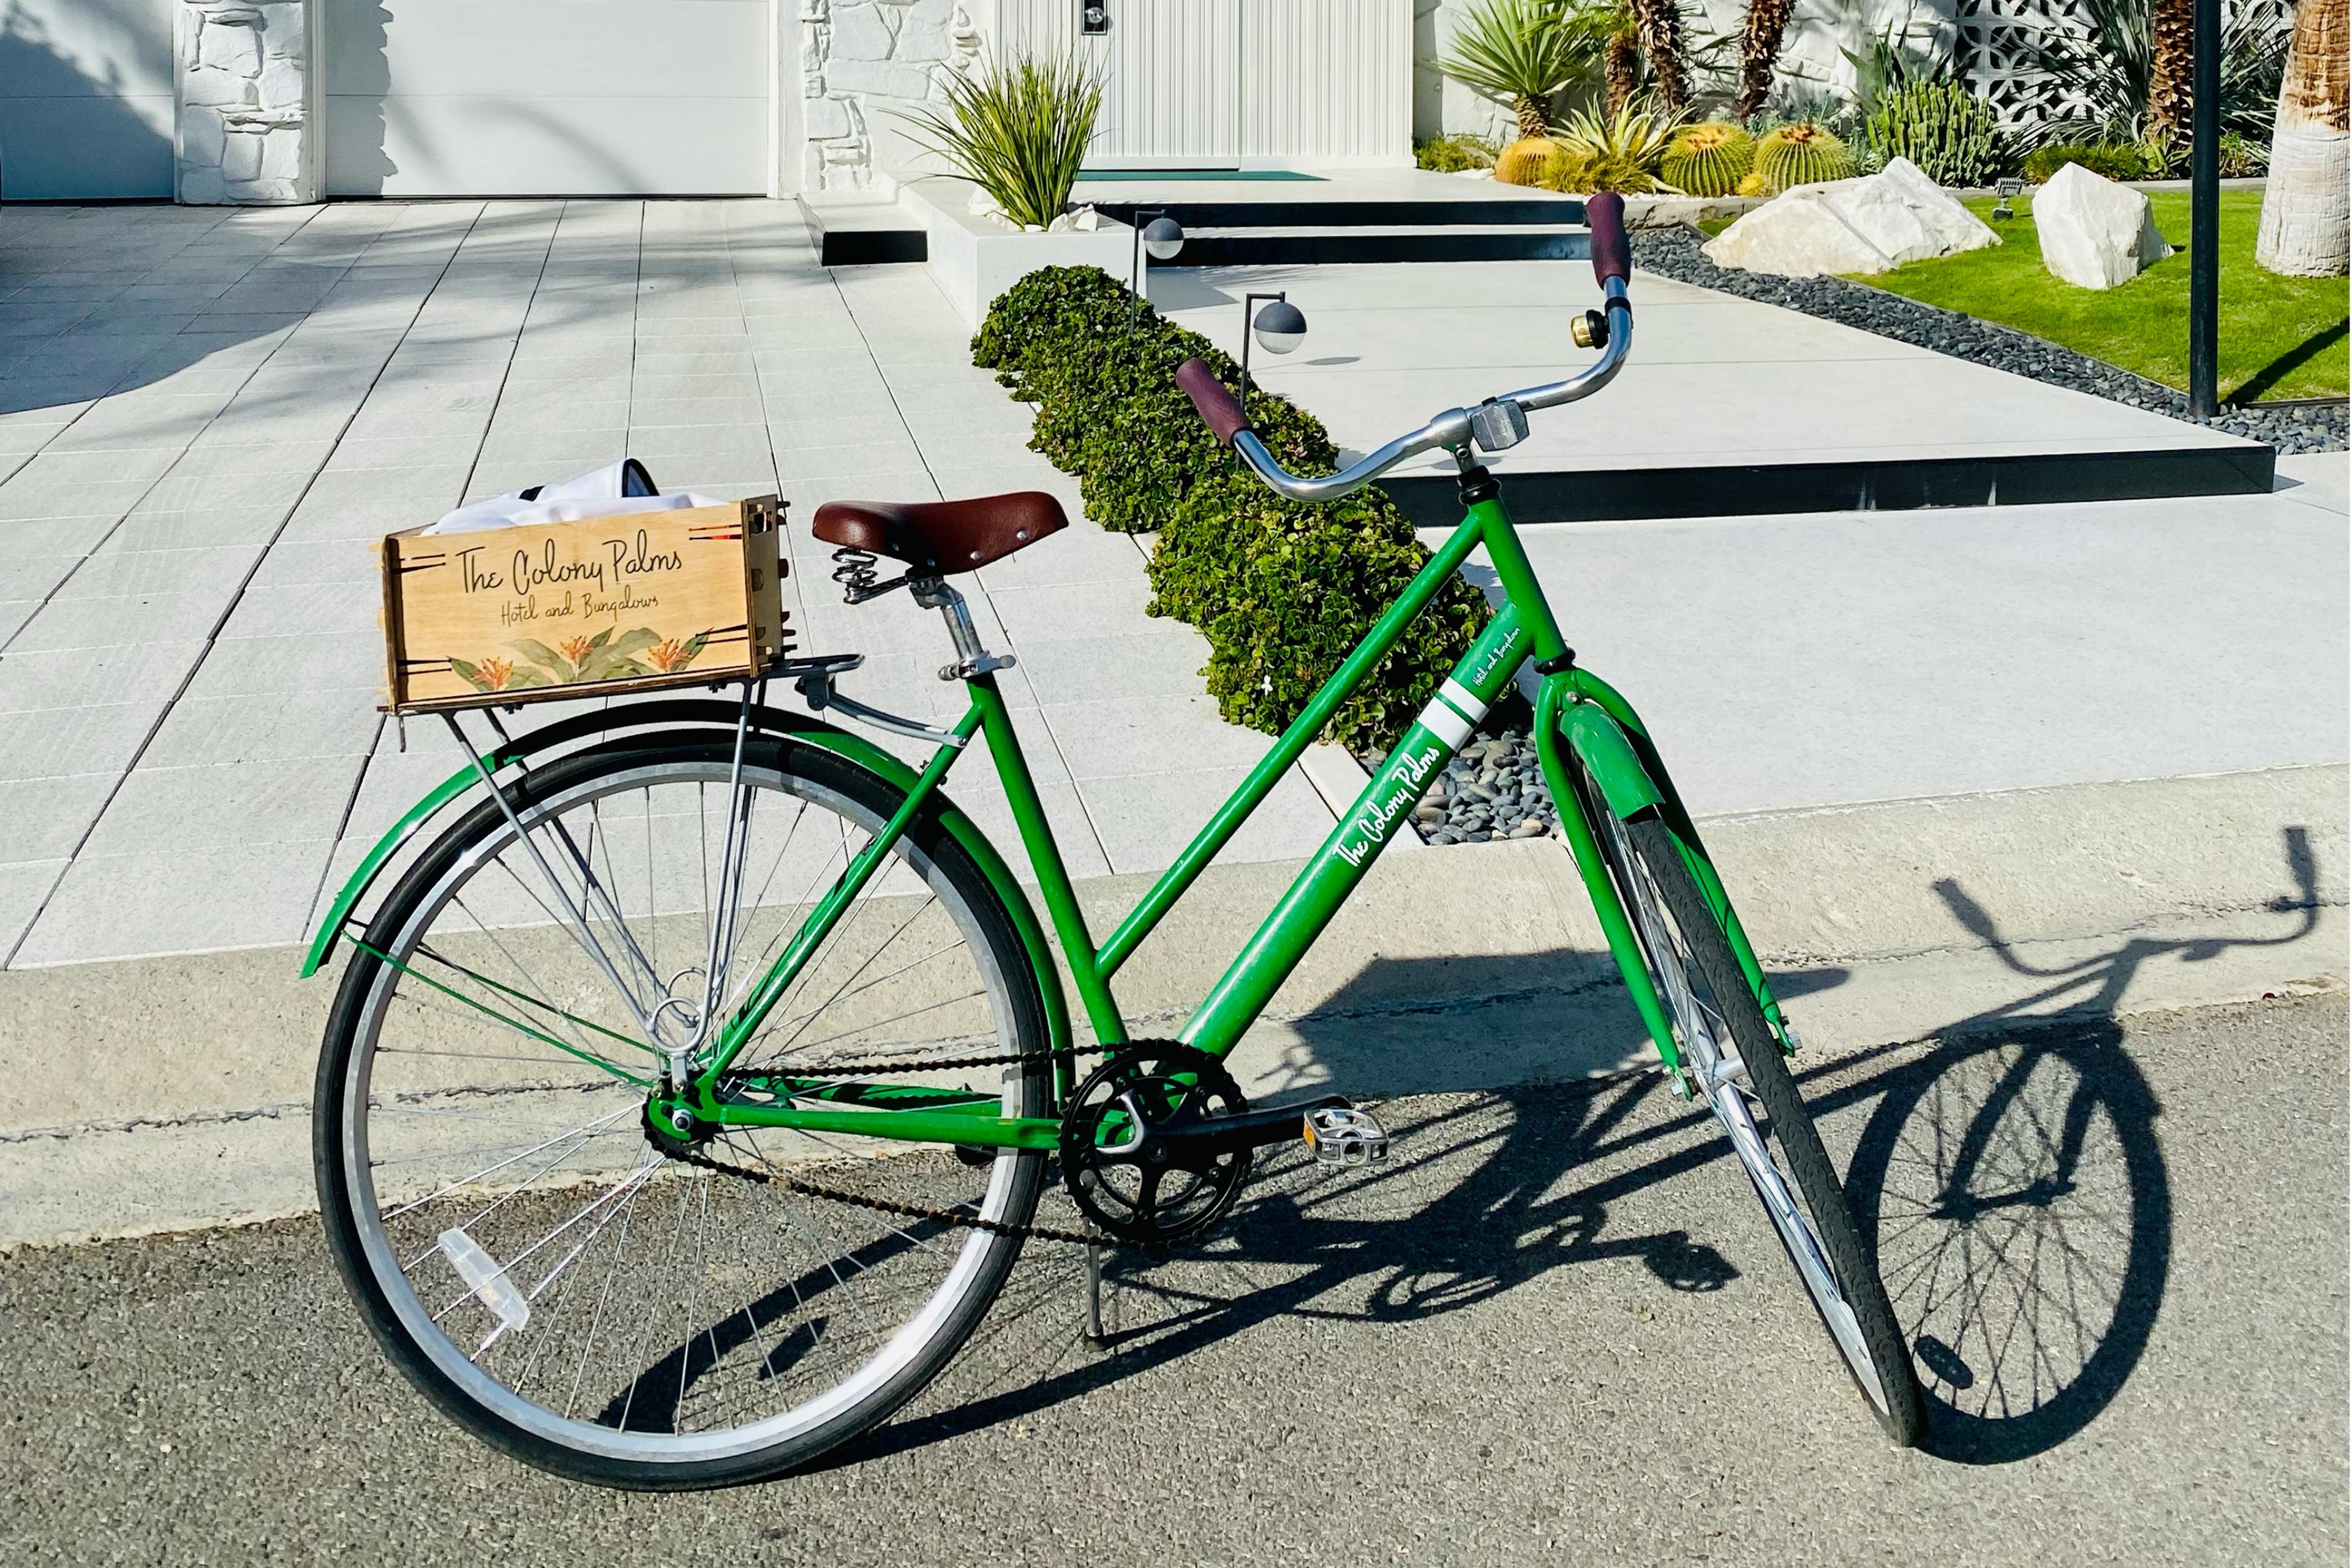 Green bike with a wooden basket on the back